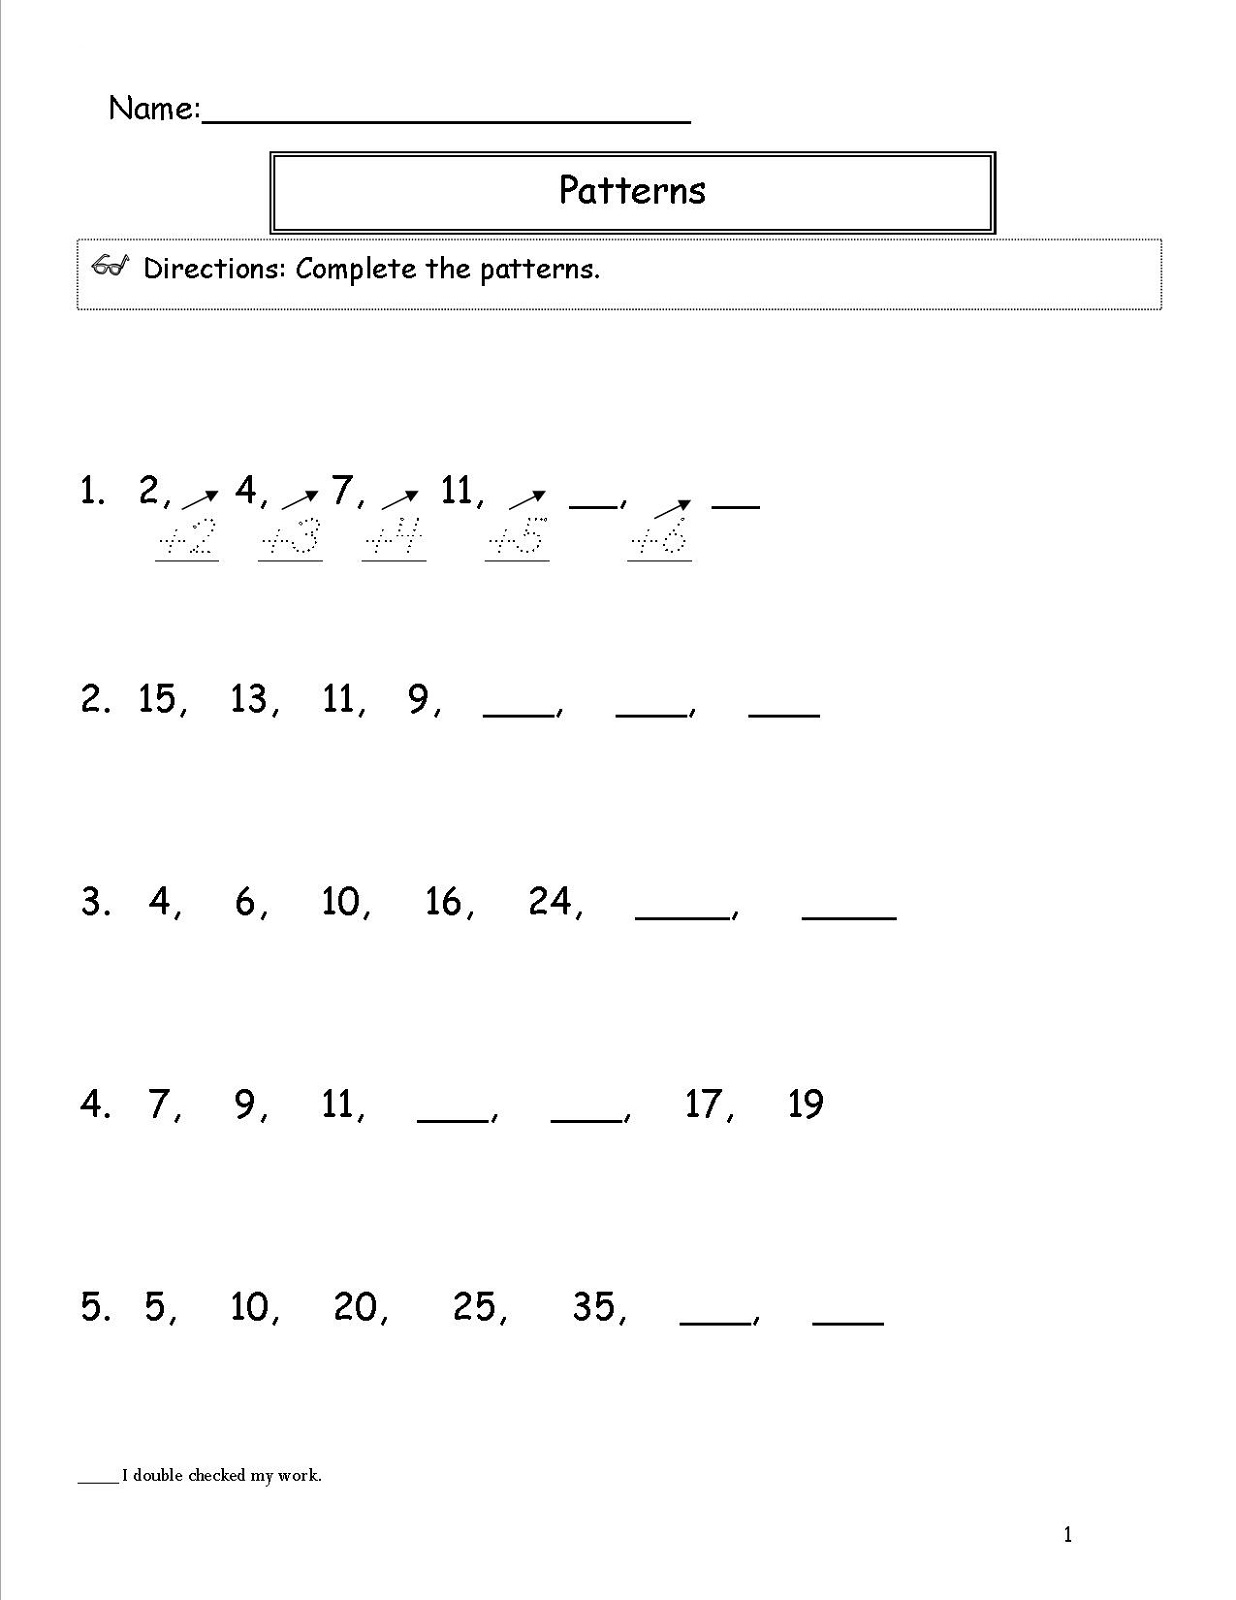 Shapes and Numbers Worksheets Pattern